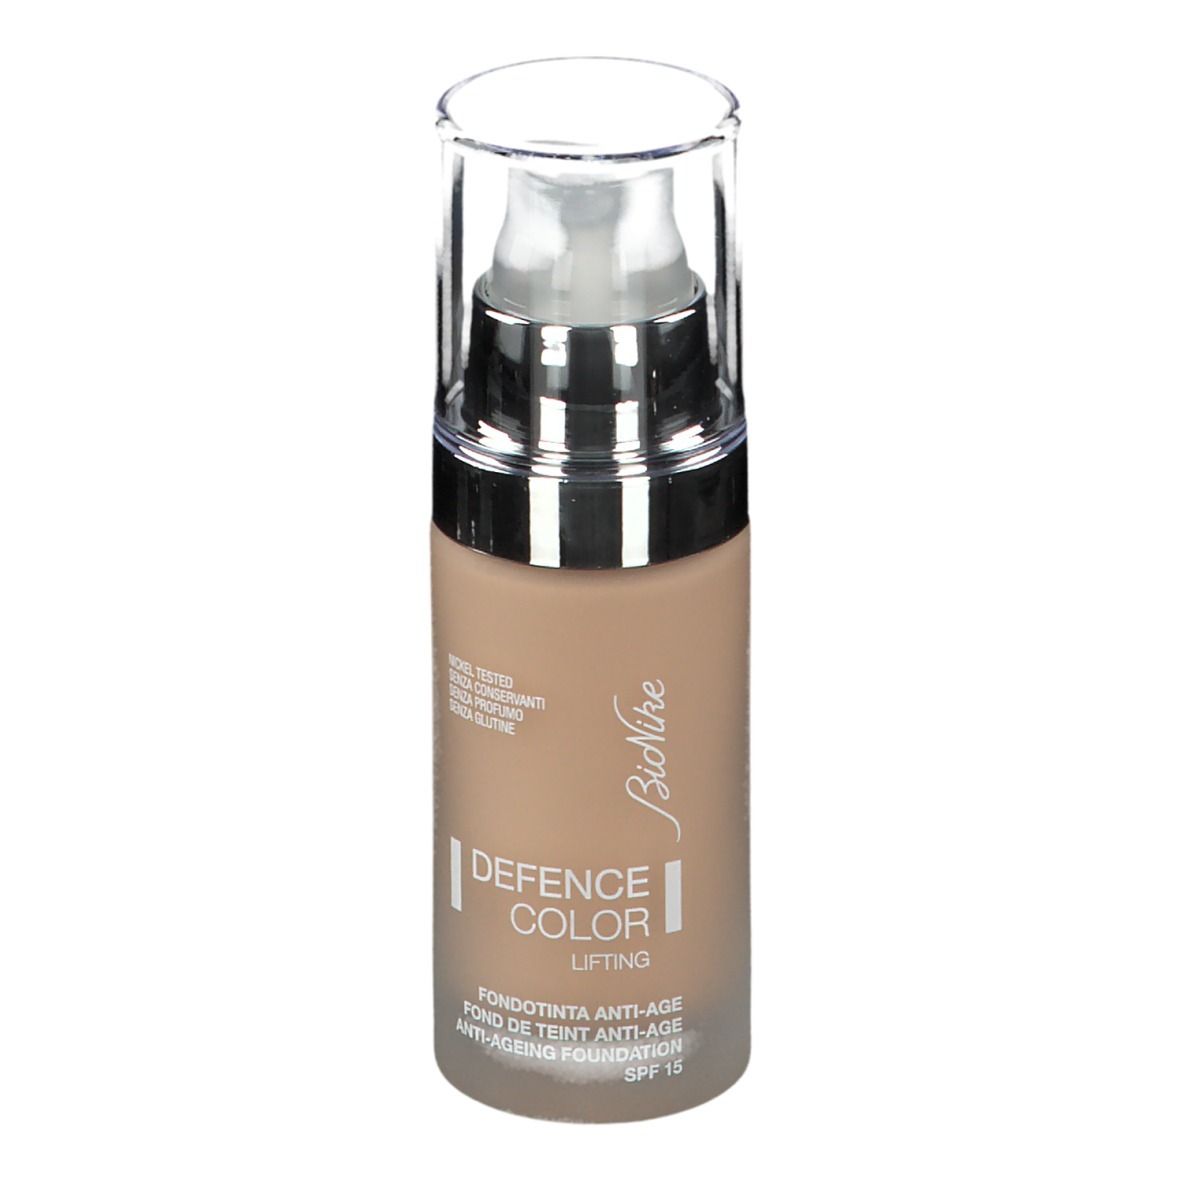 BioNike DEFENCE COLOR LIFTING Anti-Aging-Foundation 203 Beige